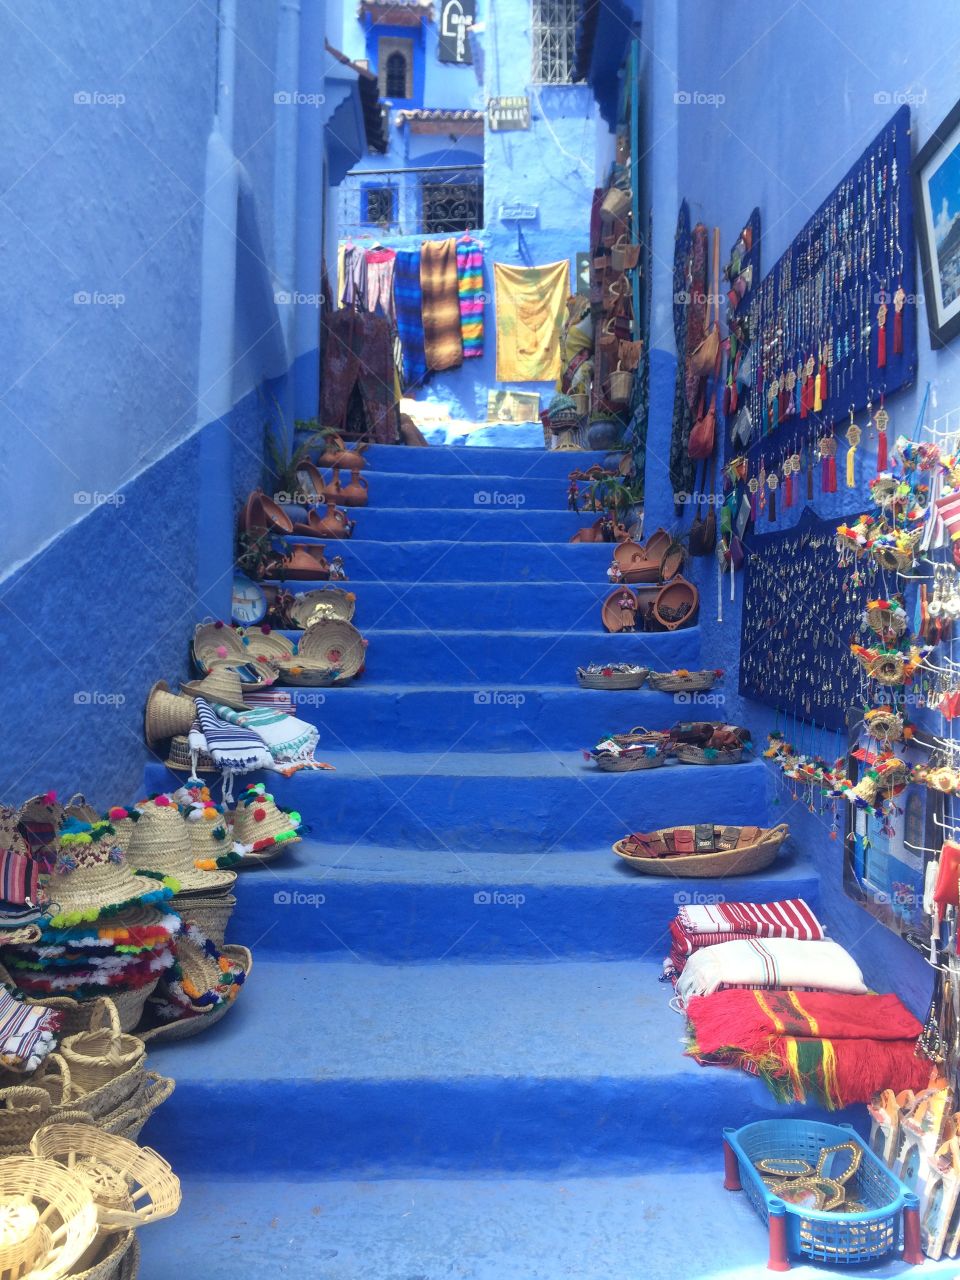 A colorful market in the equally colorful streets of Chefchaouene, Morocco.